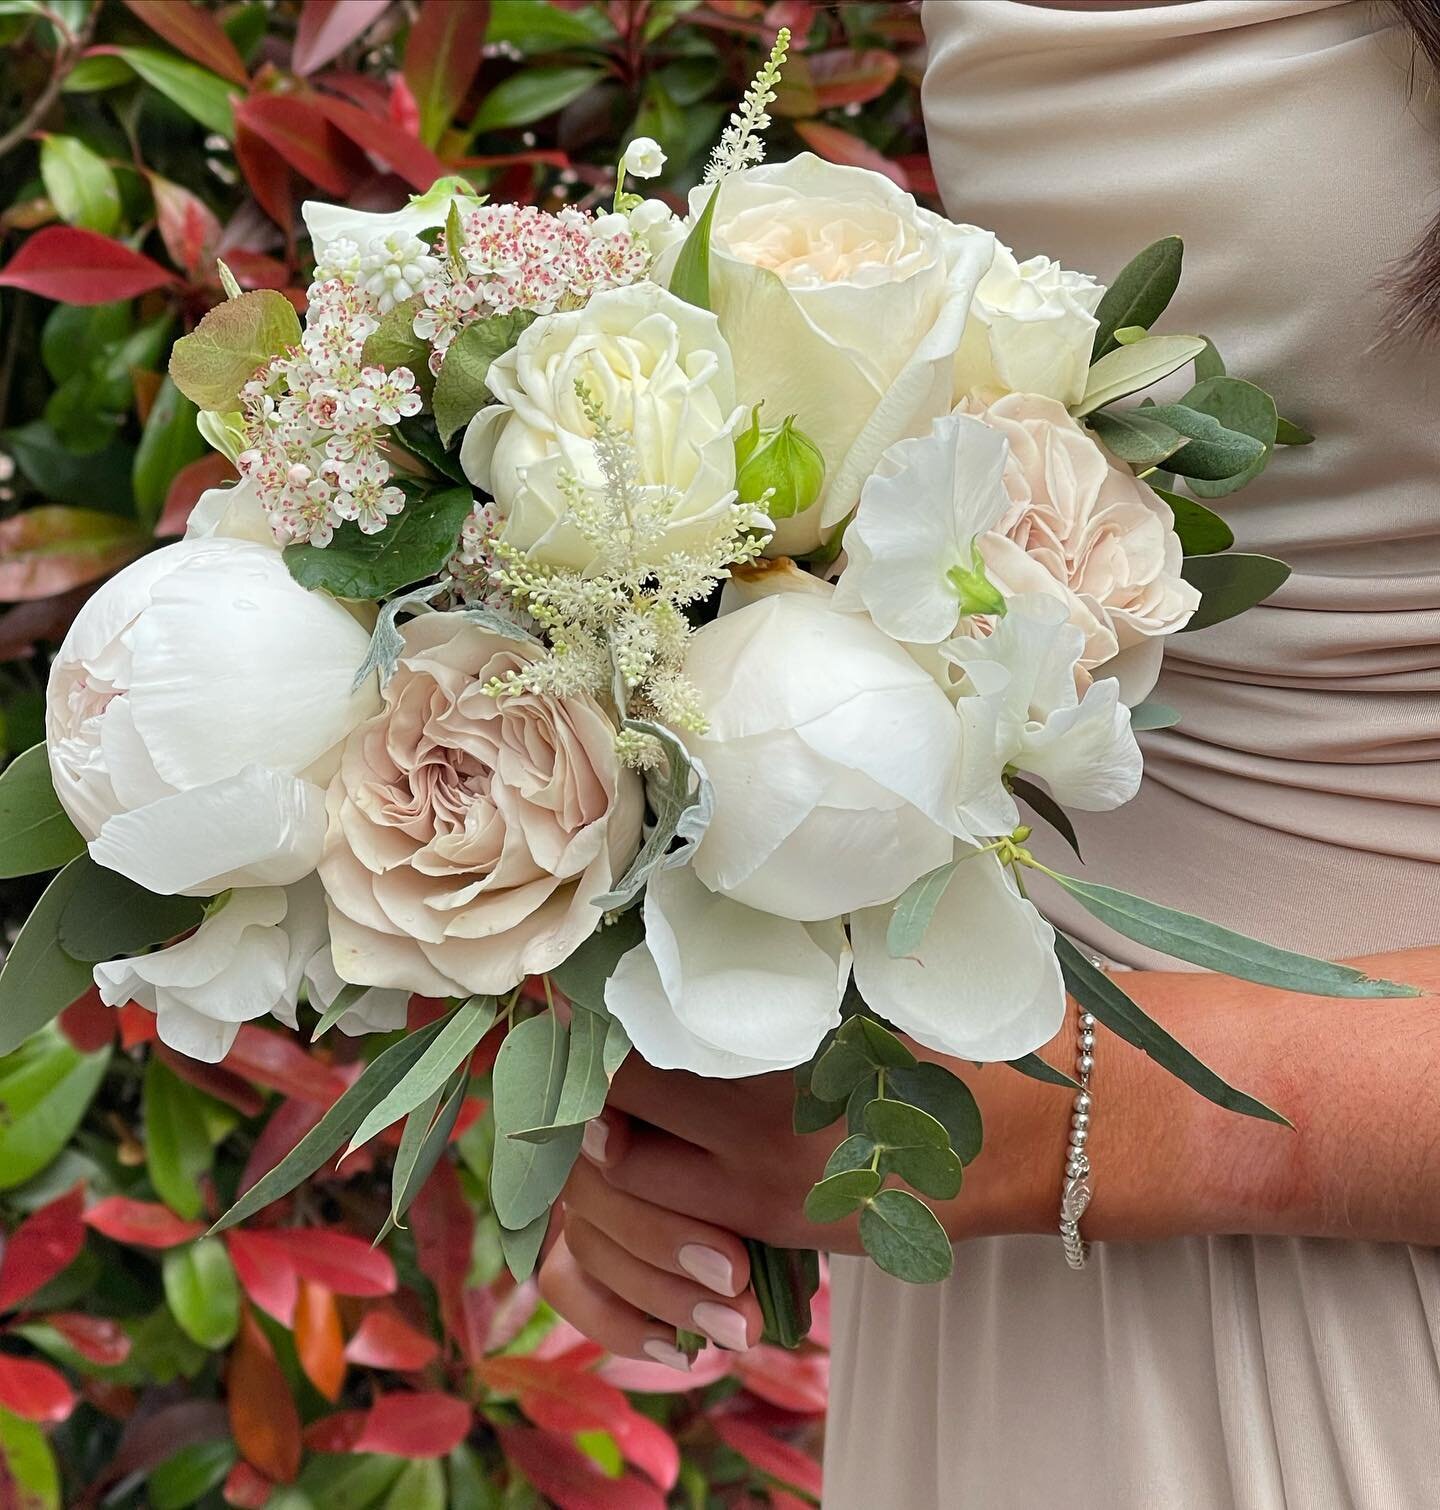 Beautiful Bridesmaids Bouquets created for Rachel &amp; Adam&rsquo;s wedding last weekend, gorgeous Peonies, heavenly Roses, glorious Sweet Peas, Lily of the Valley Astilbe and blossom were gathered together to create the perfect bouquet, toning with